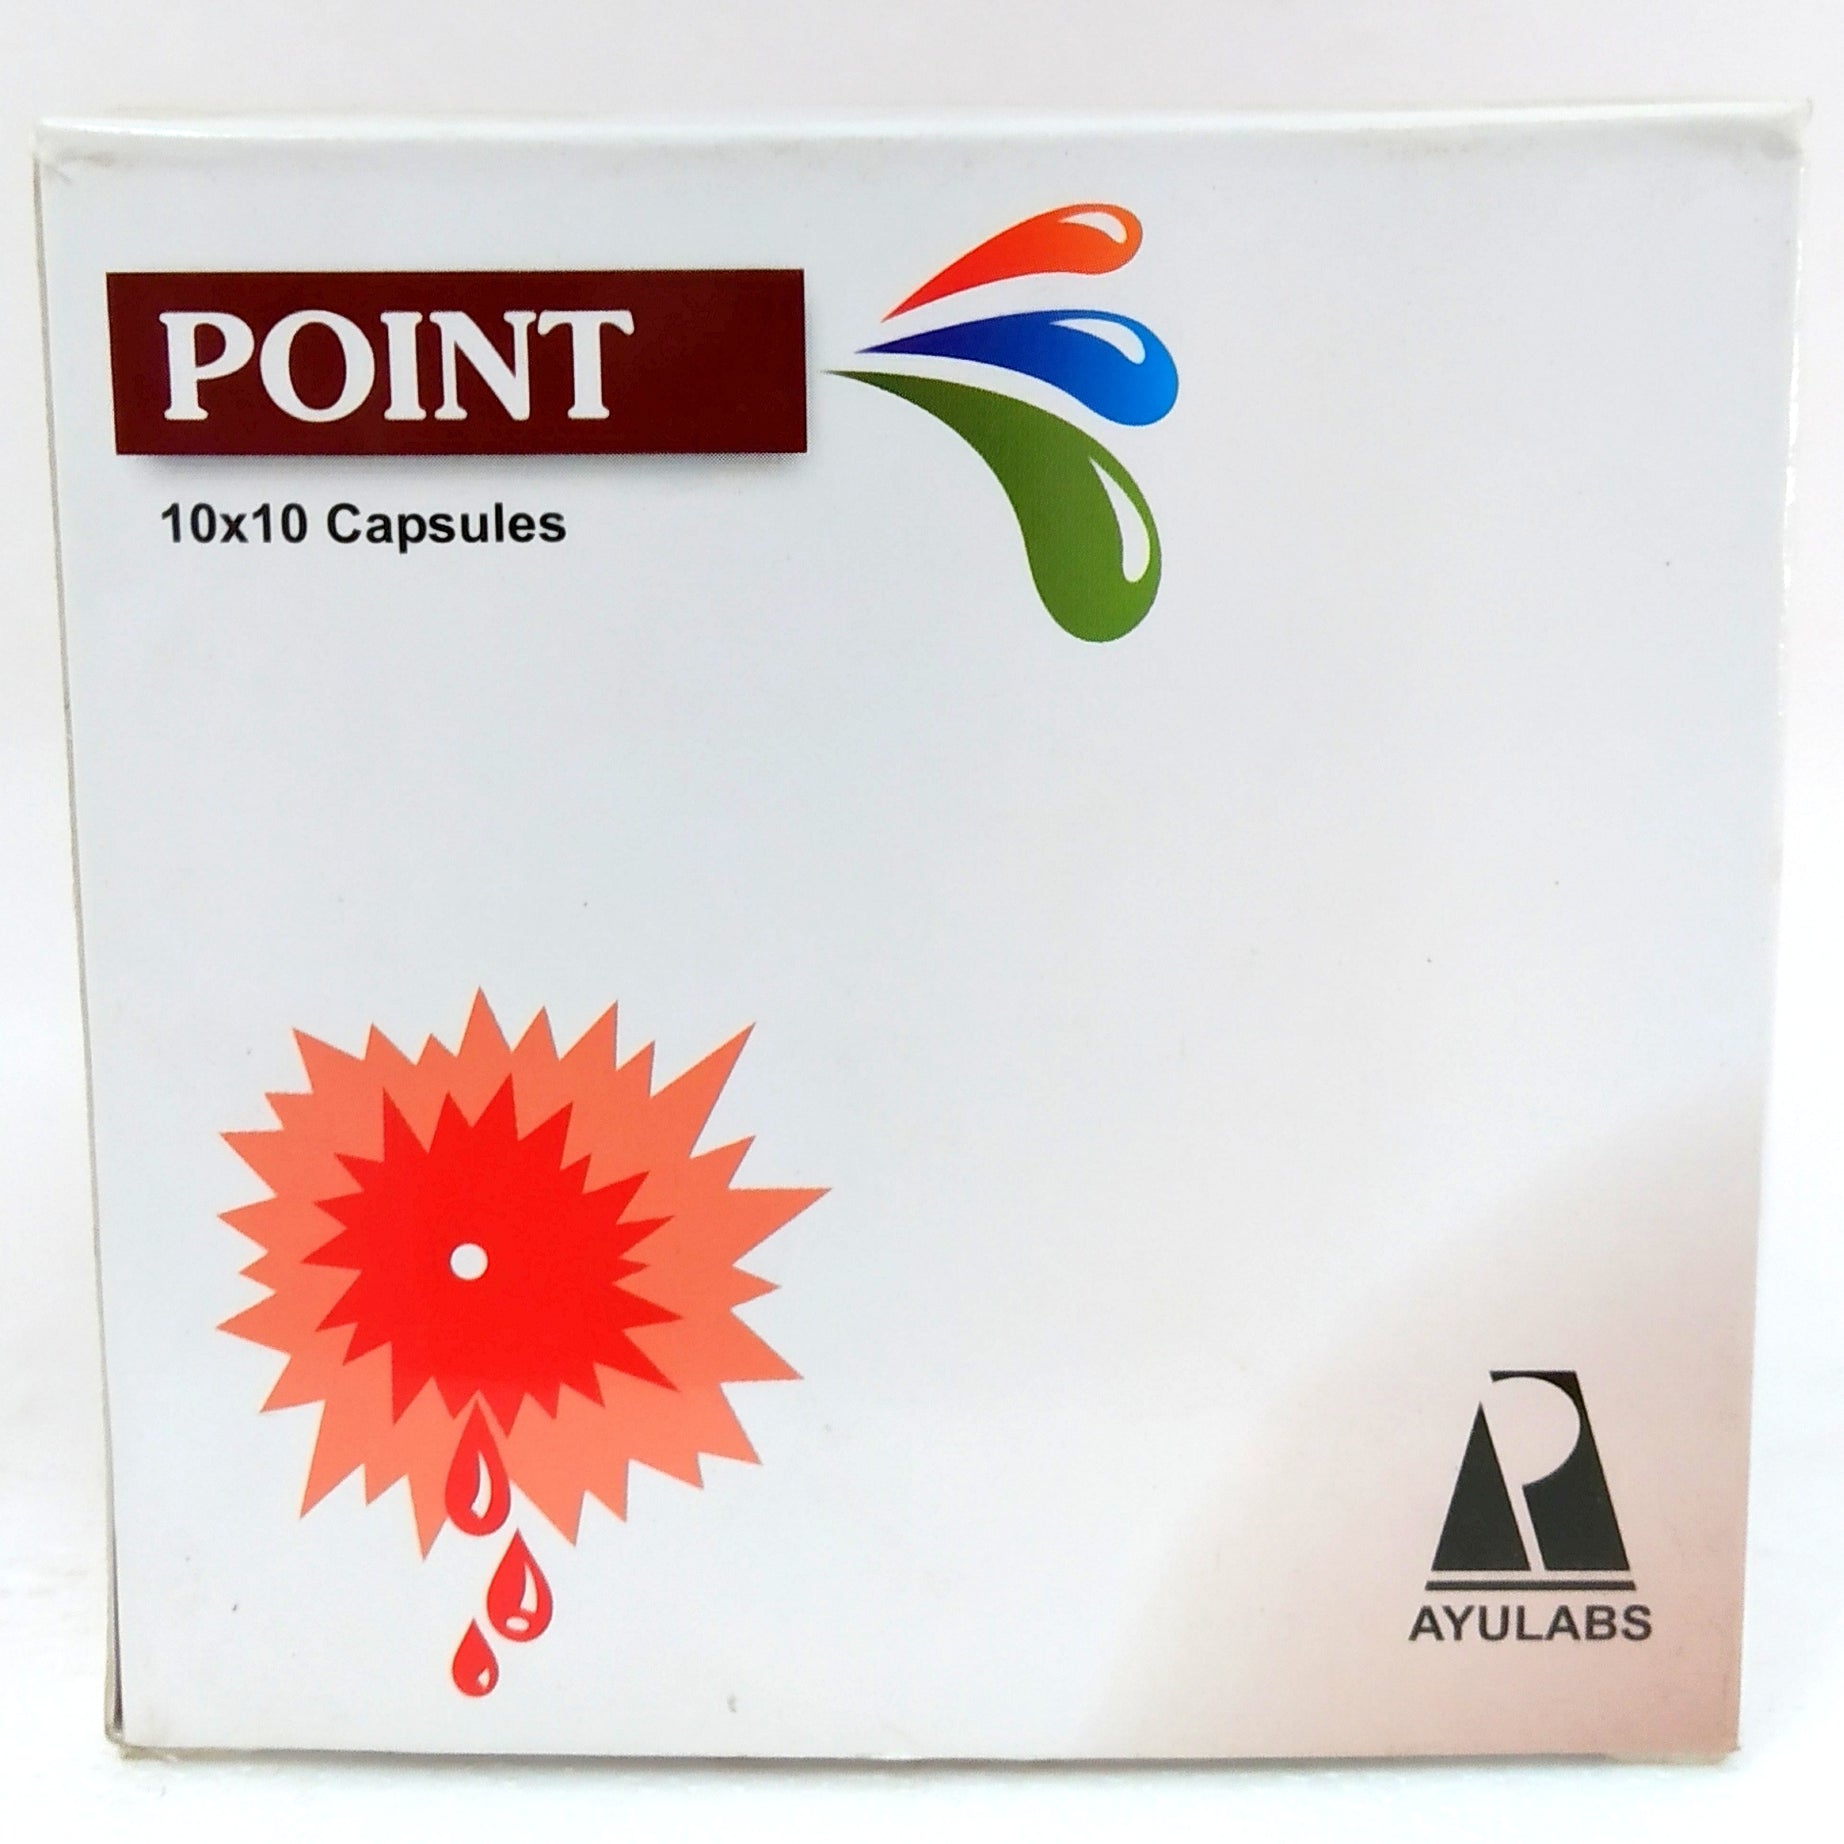 Shop Point 10Capsules at price 50.00 from Ayulabs Online - Ayush Care